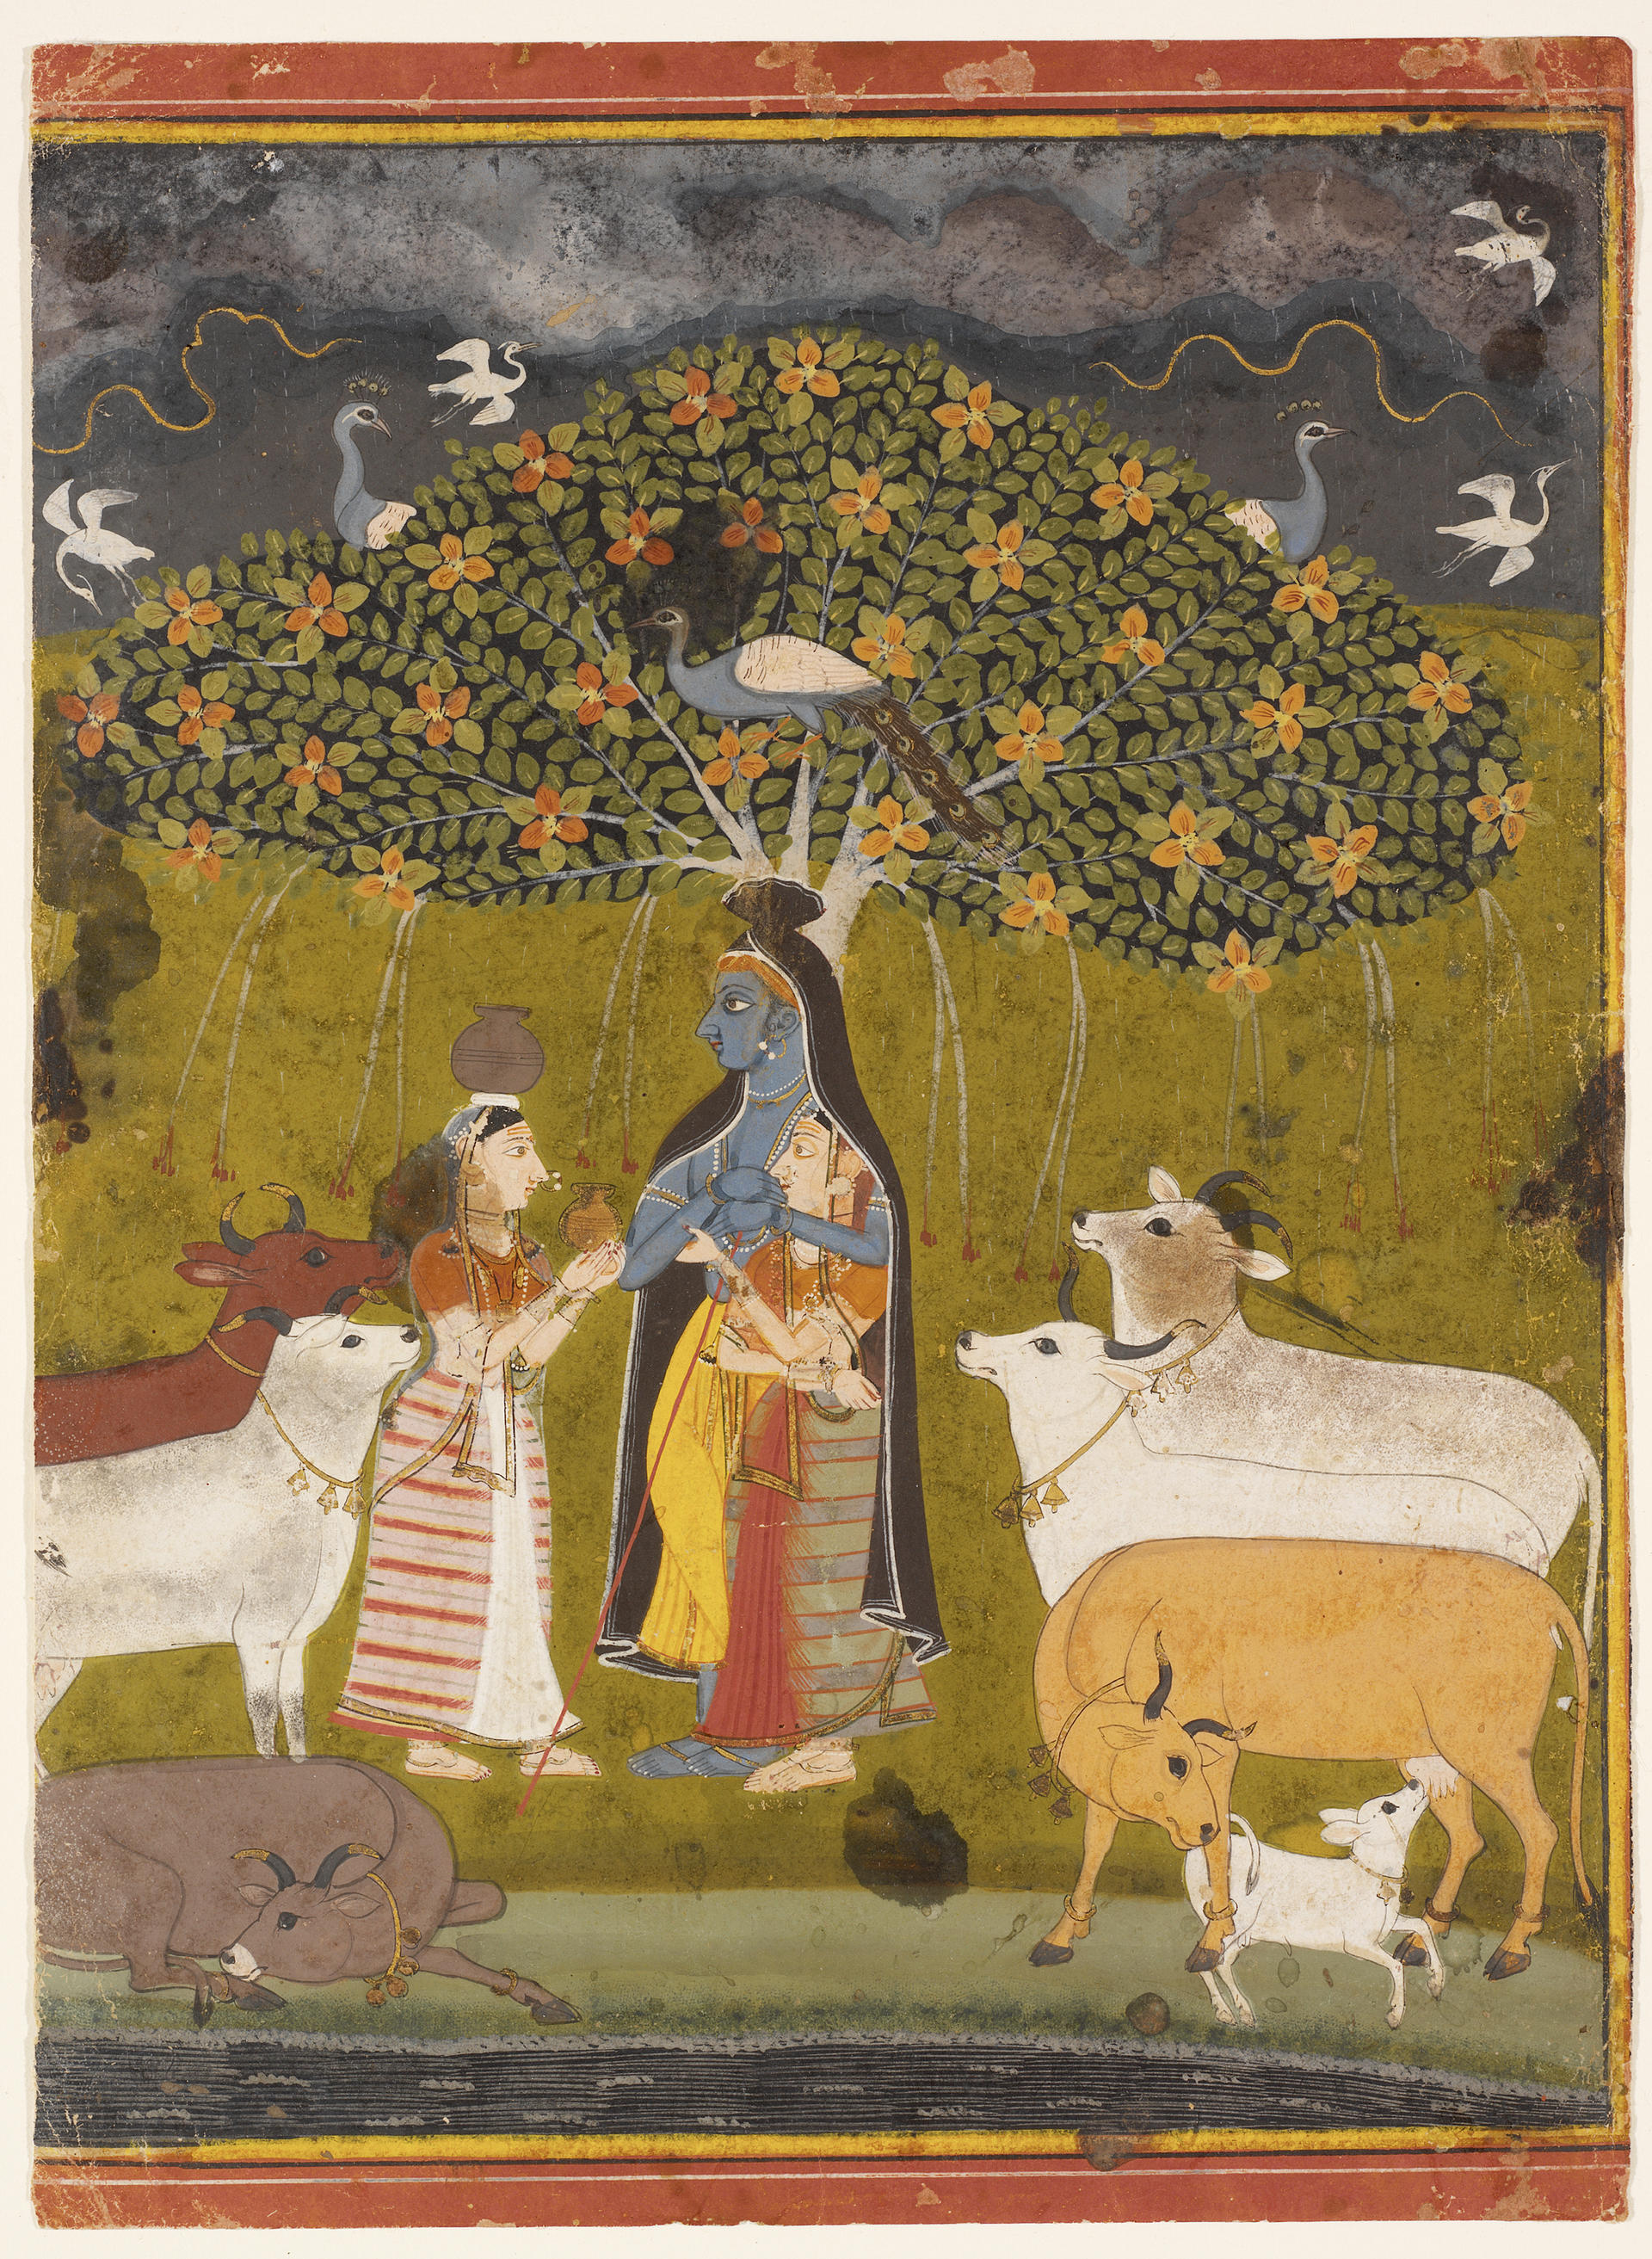 Painting of a blue robed figure facing a small robed figure. They are surrounded by cows of various colors and grass. Behind them is a tree with orange flowers and blue birds surrounding the leaves.